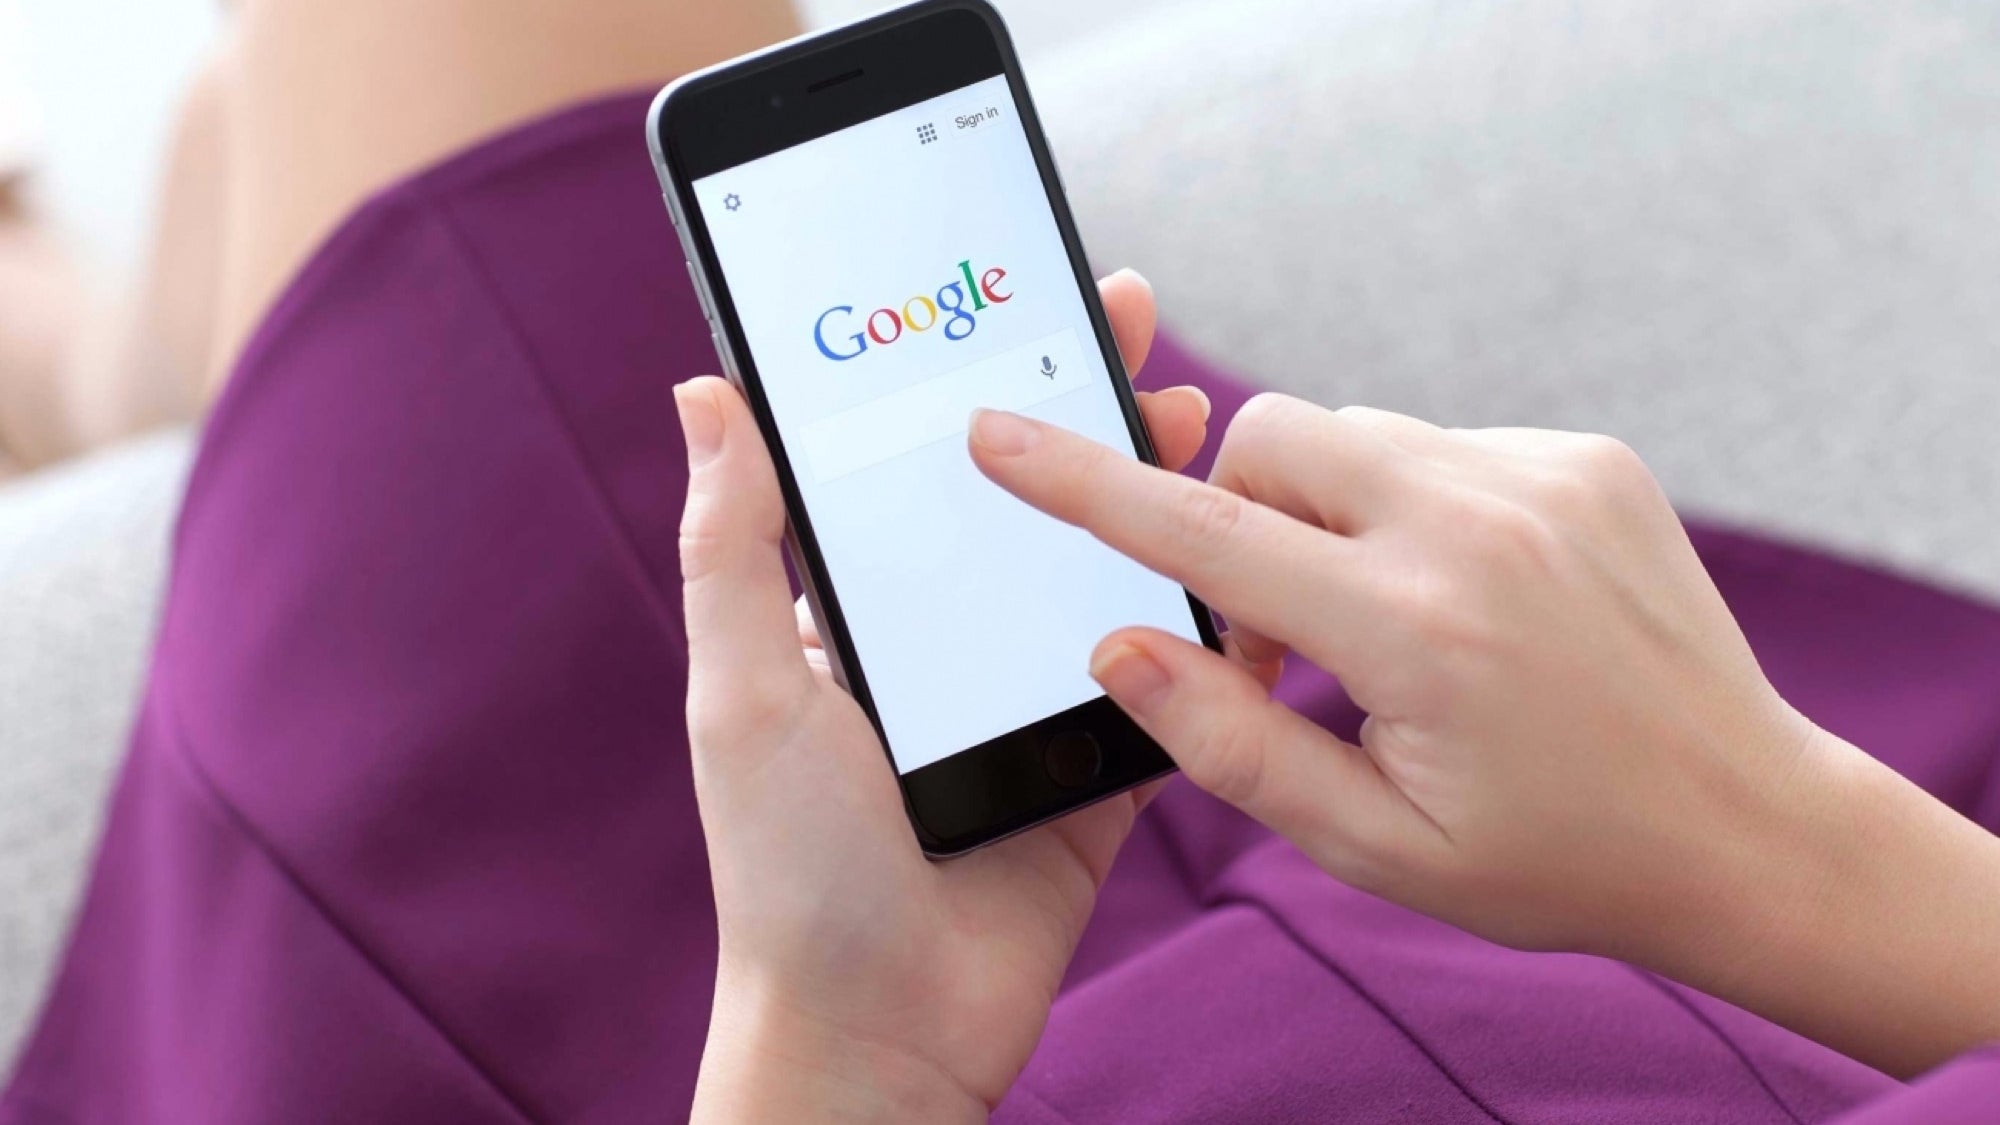 A woman in purple dress holding a phone on Google search engine